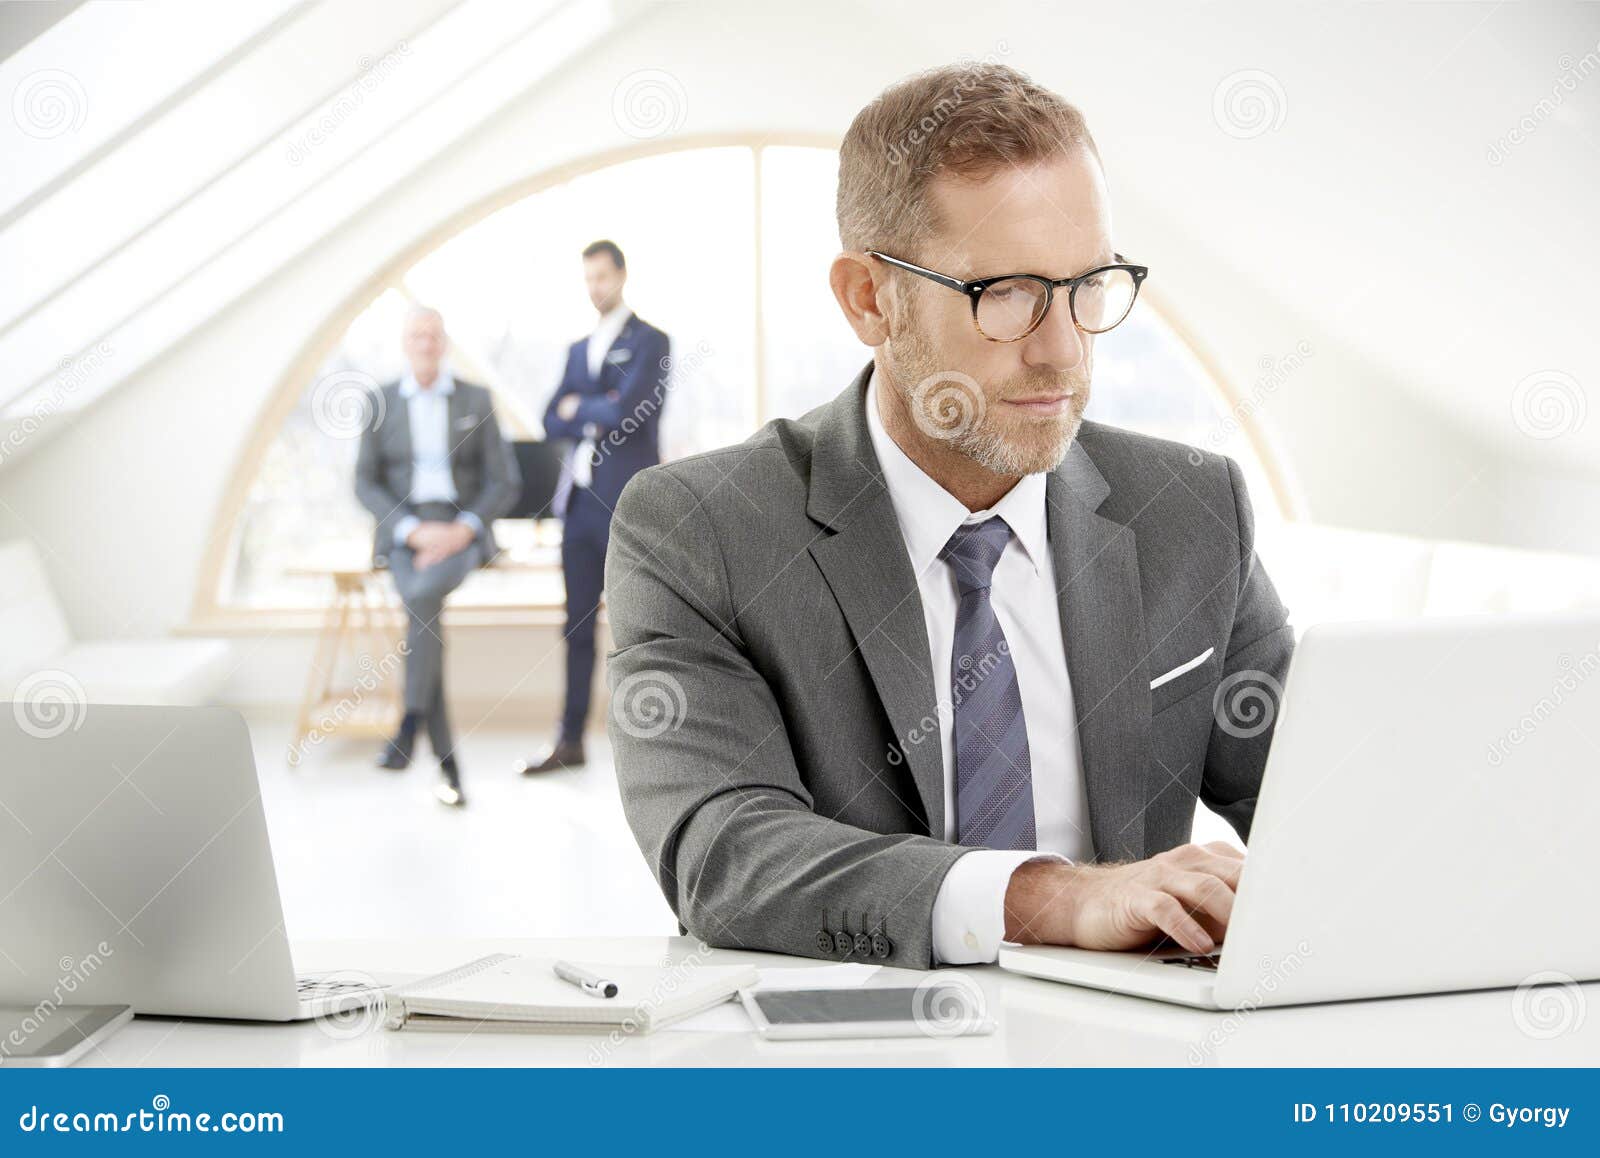 Financial Advisor With Laptop Stock Image Image Of Office